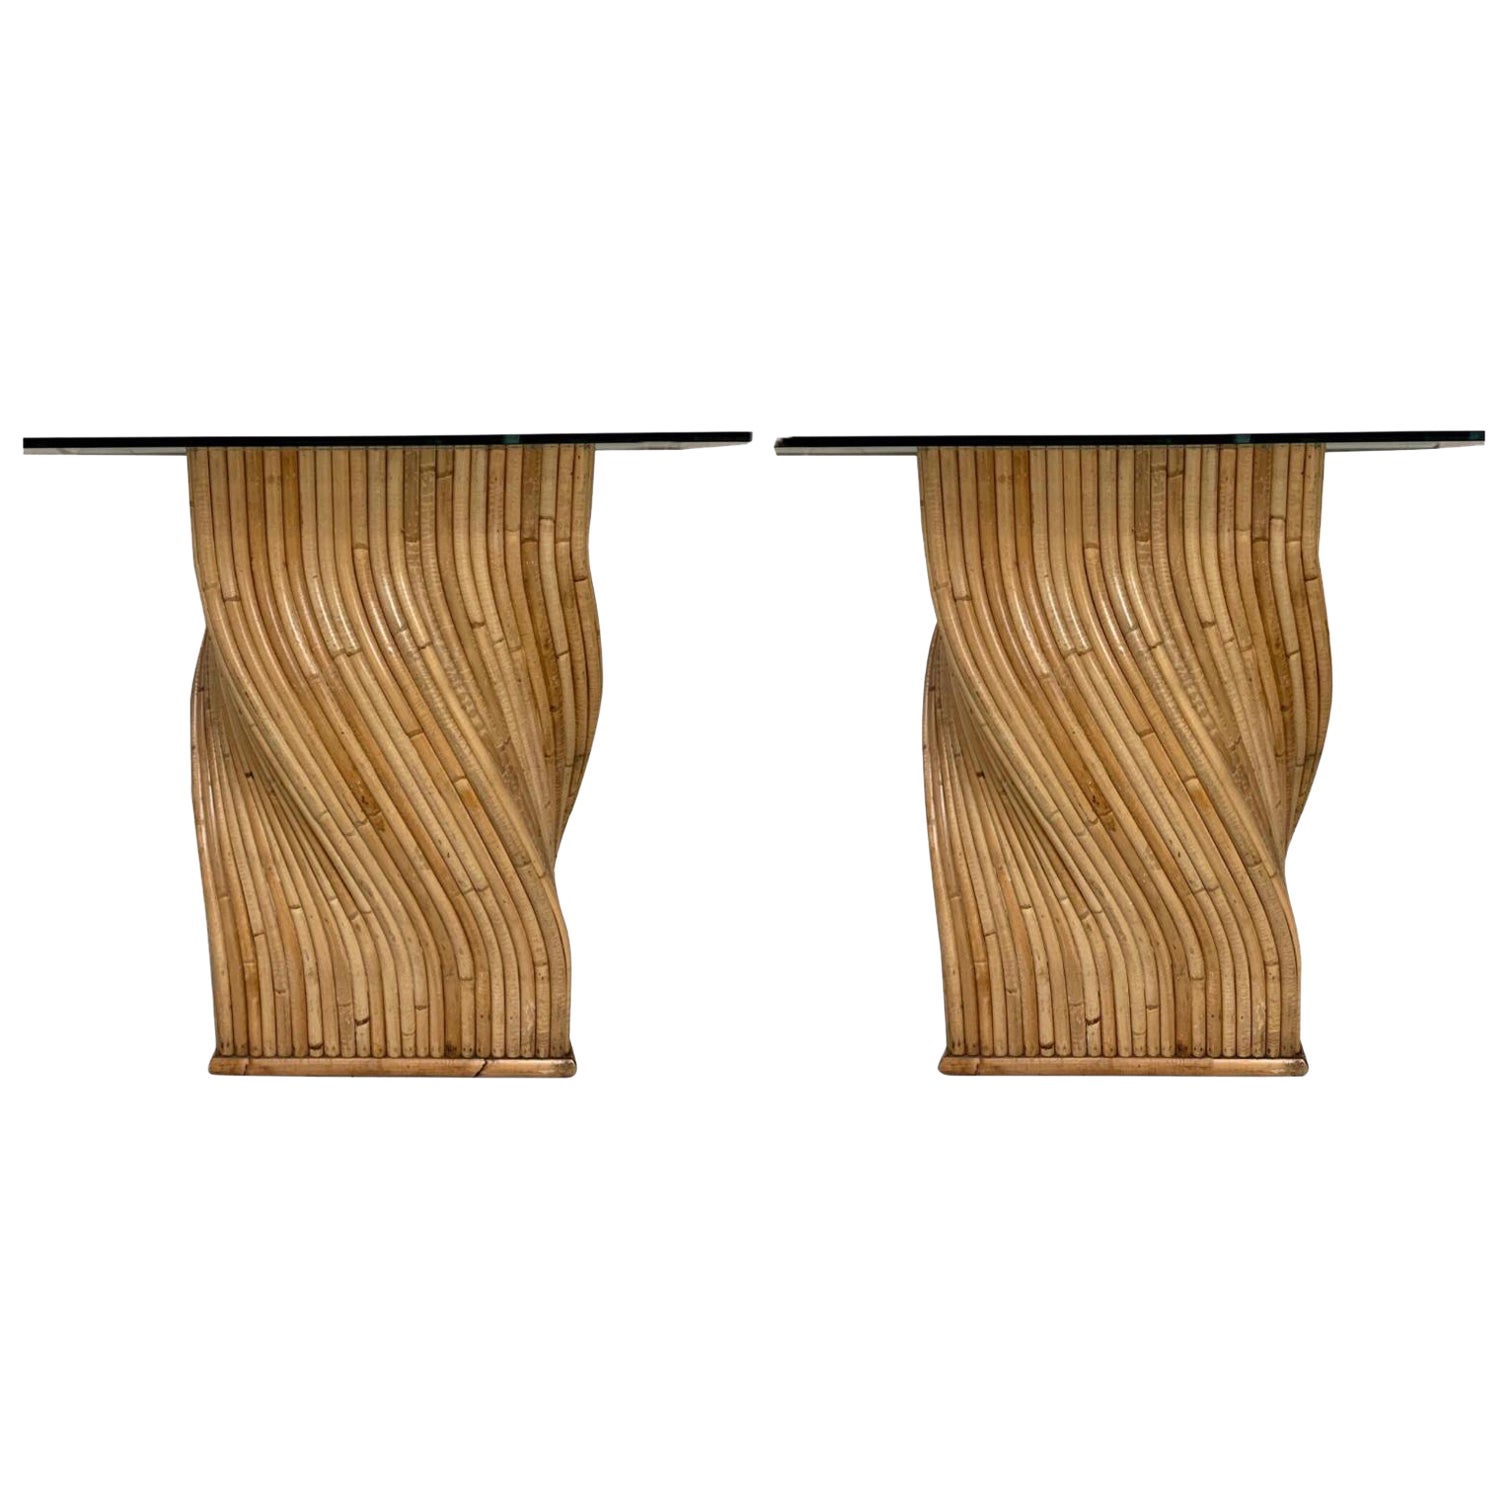 Organic Modern Pencil Bamboo Table Bases / Pedestals / Console Tables - Pair